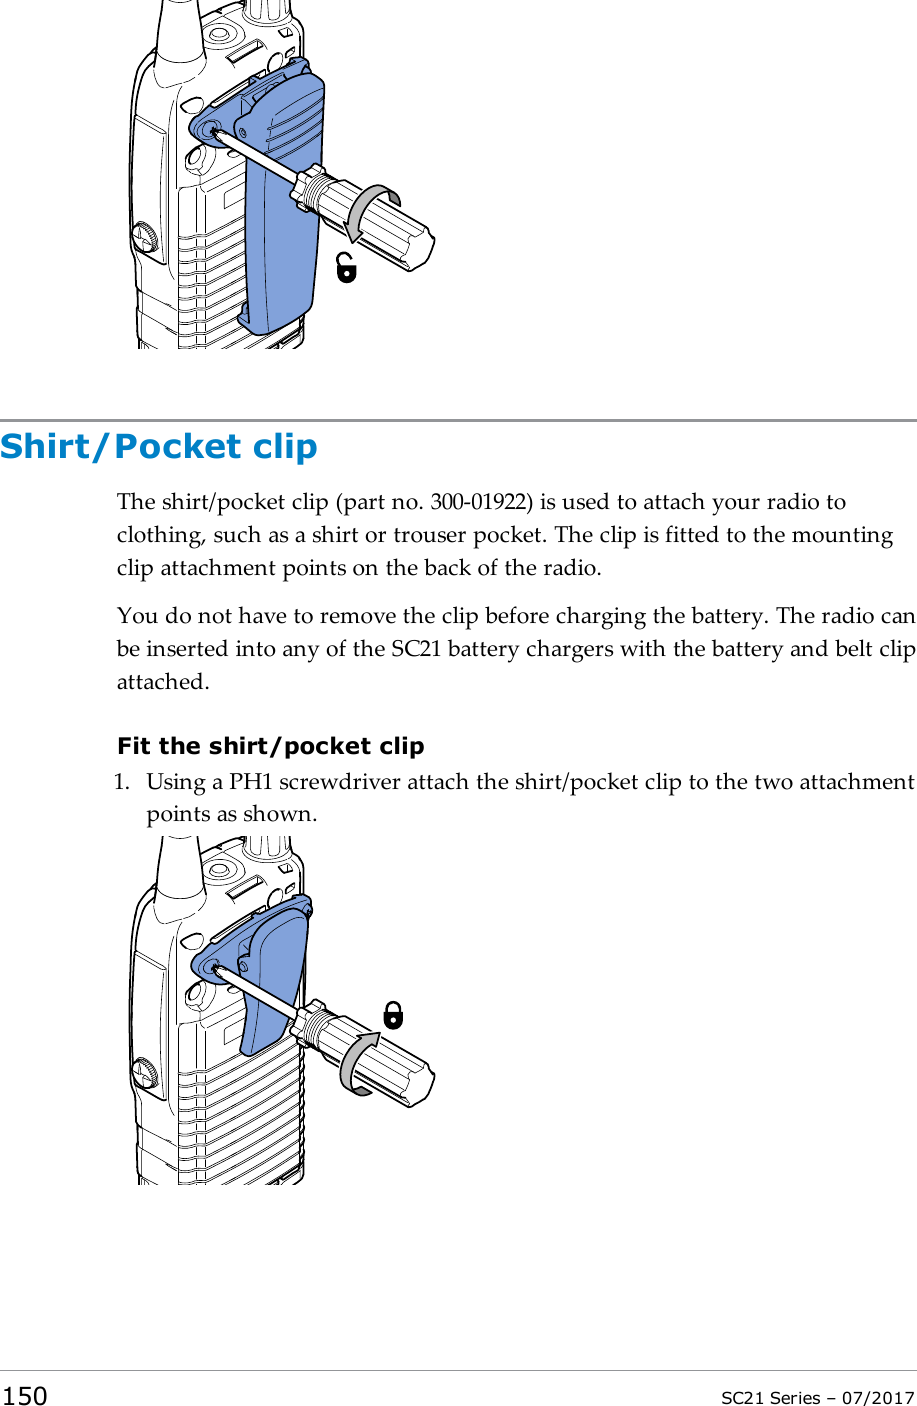 Shirt/Pocket clipThe shirt/pocket clip (part no. 300-01922) is used to attach your radio toclothing, such as a shirt or trouser pocket. The clip is fitted to the mountingclip attachment points on the back of the radio.You do not have to remove the clip before charging the battery. The radio canbe inserted into any of the SC21 battery chargers with the battery and belt clipattached.Fit the shirt/pocket clip1. Using a PH1 screwdriver attach the shirt/pocket clip to the two attachmentpoints as shown.150 SC21 Series – 07/2017